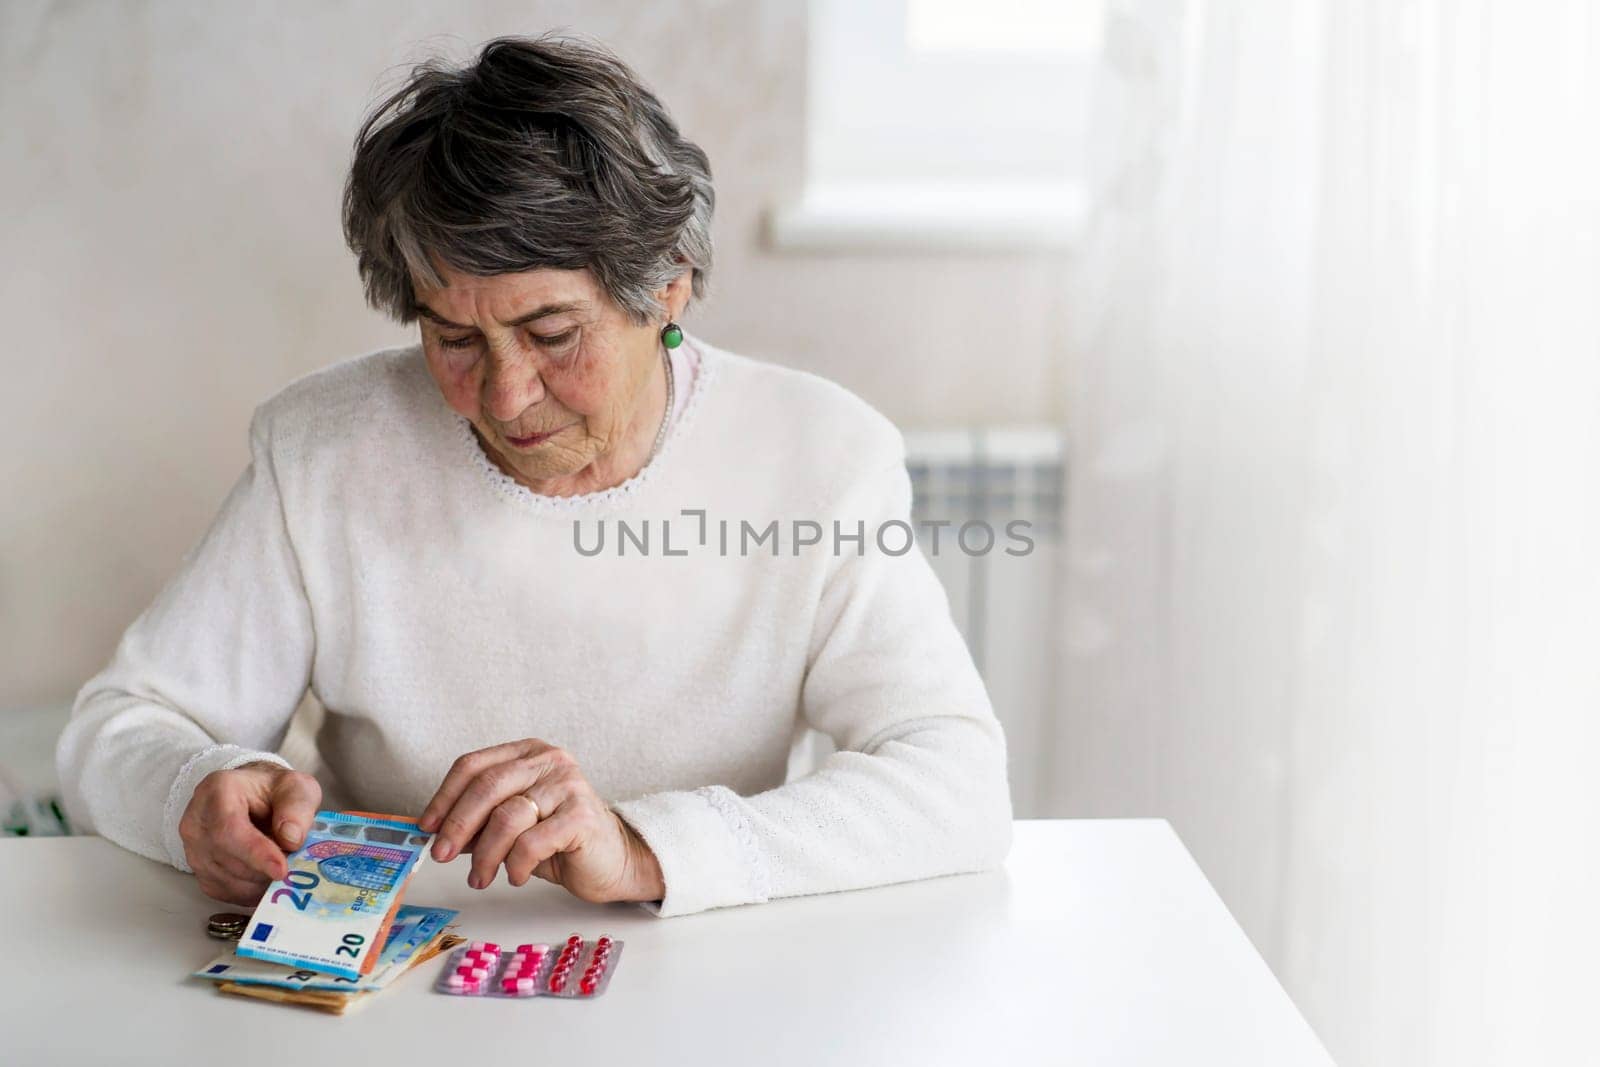 An elderly 80 year woman, a well-groomed pensioner considers her money and expenses, and saves some of it for medications and treatment. An old lady in a white sweater is planning her budget.